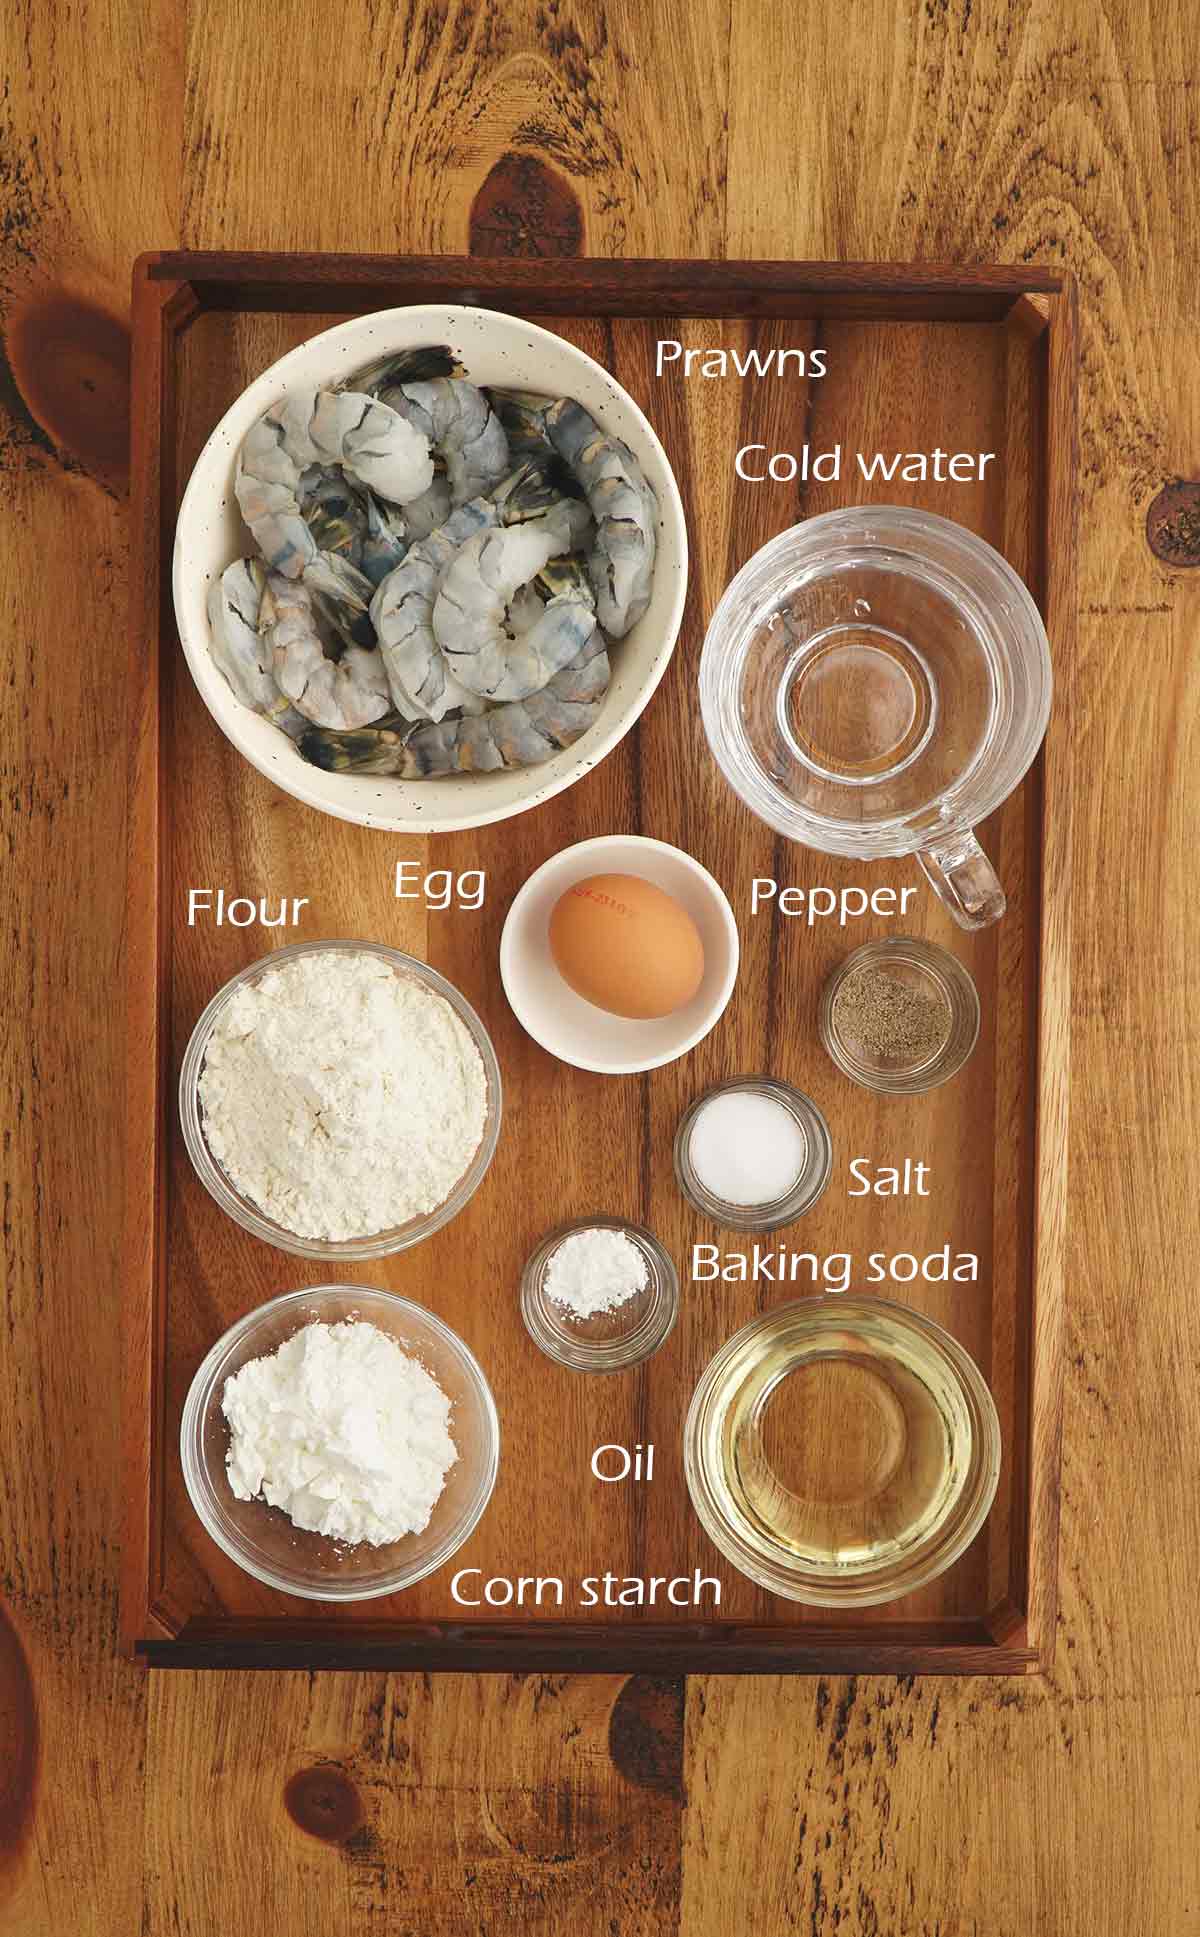 Labelled ingredients displayed on the wooden table. 